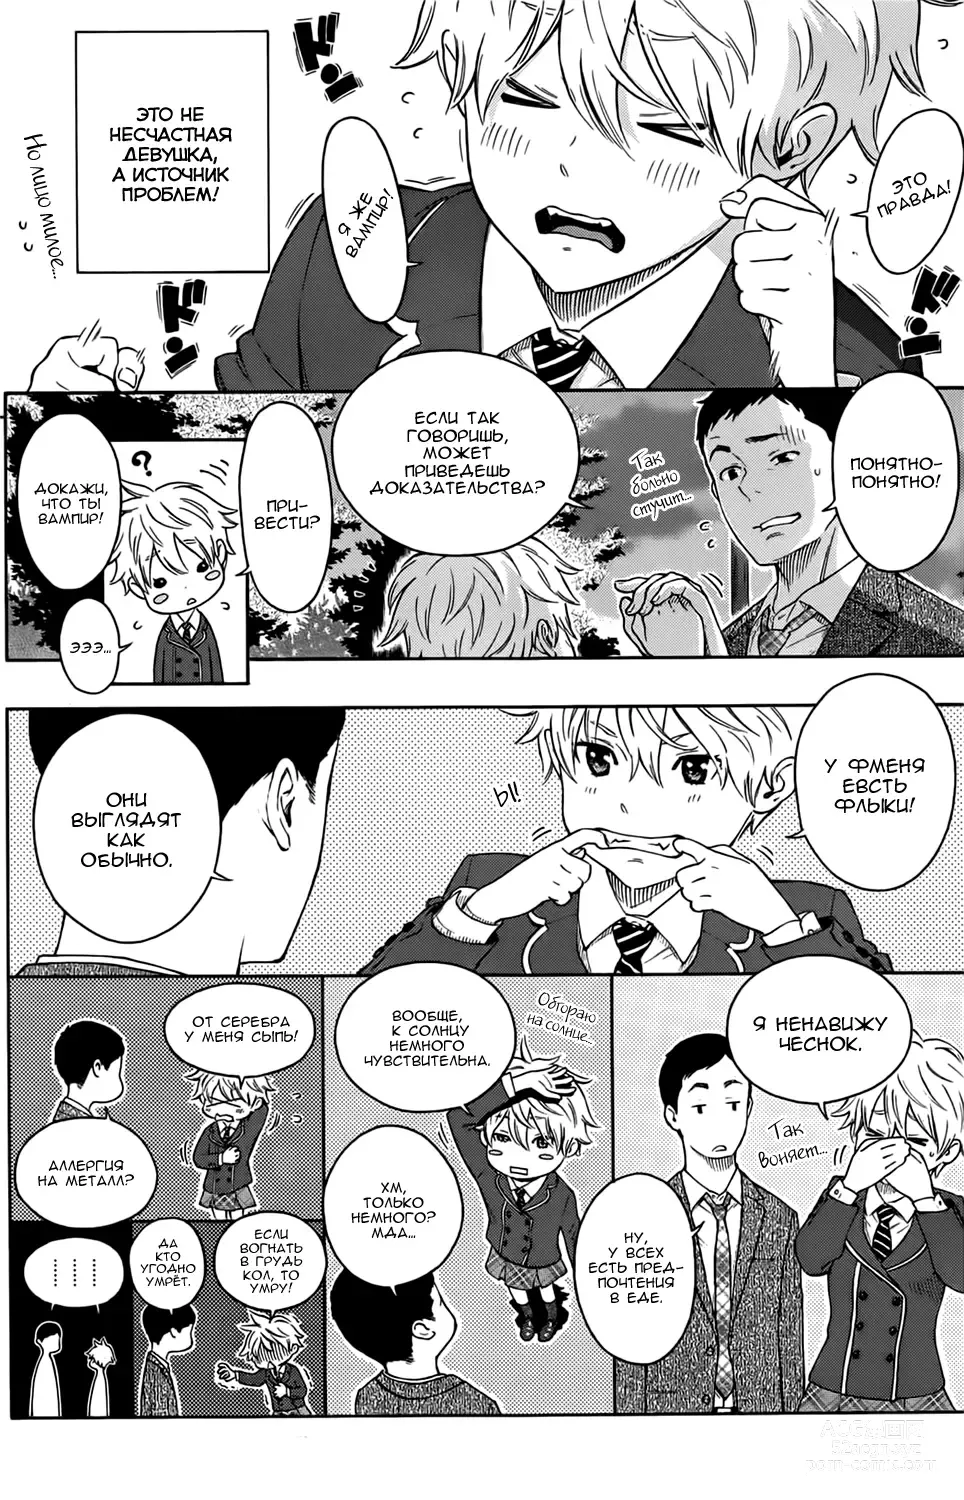 Page 4 of manga Вампир!